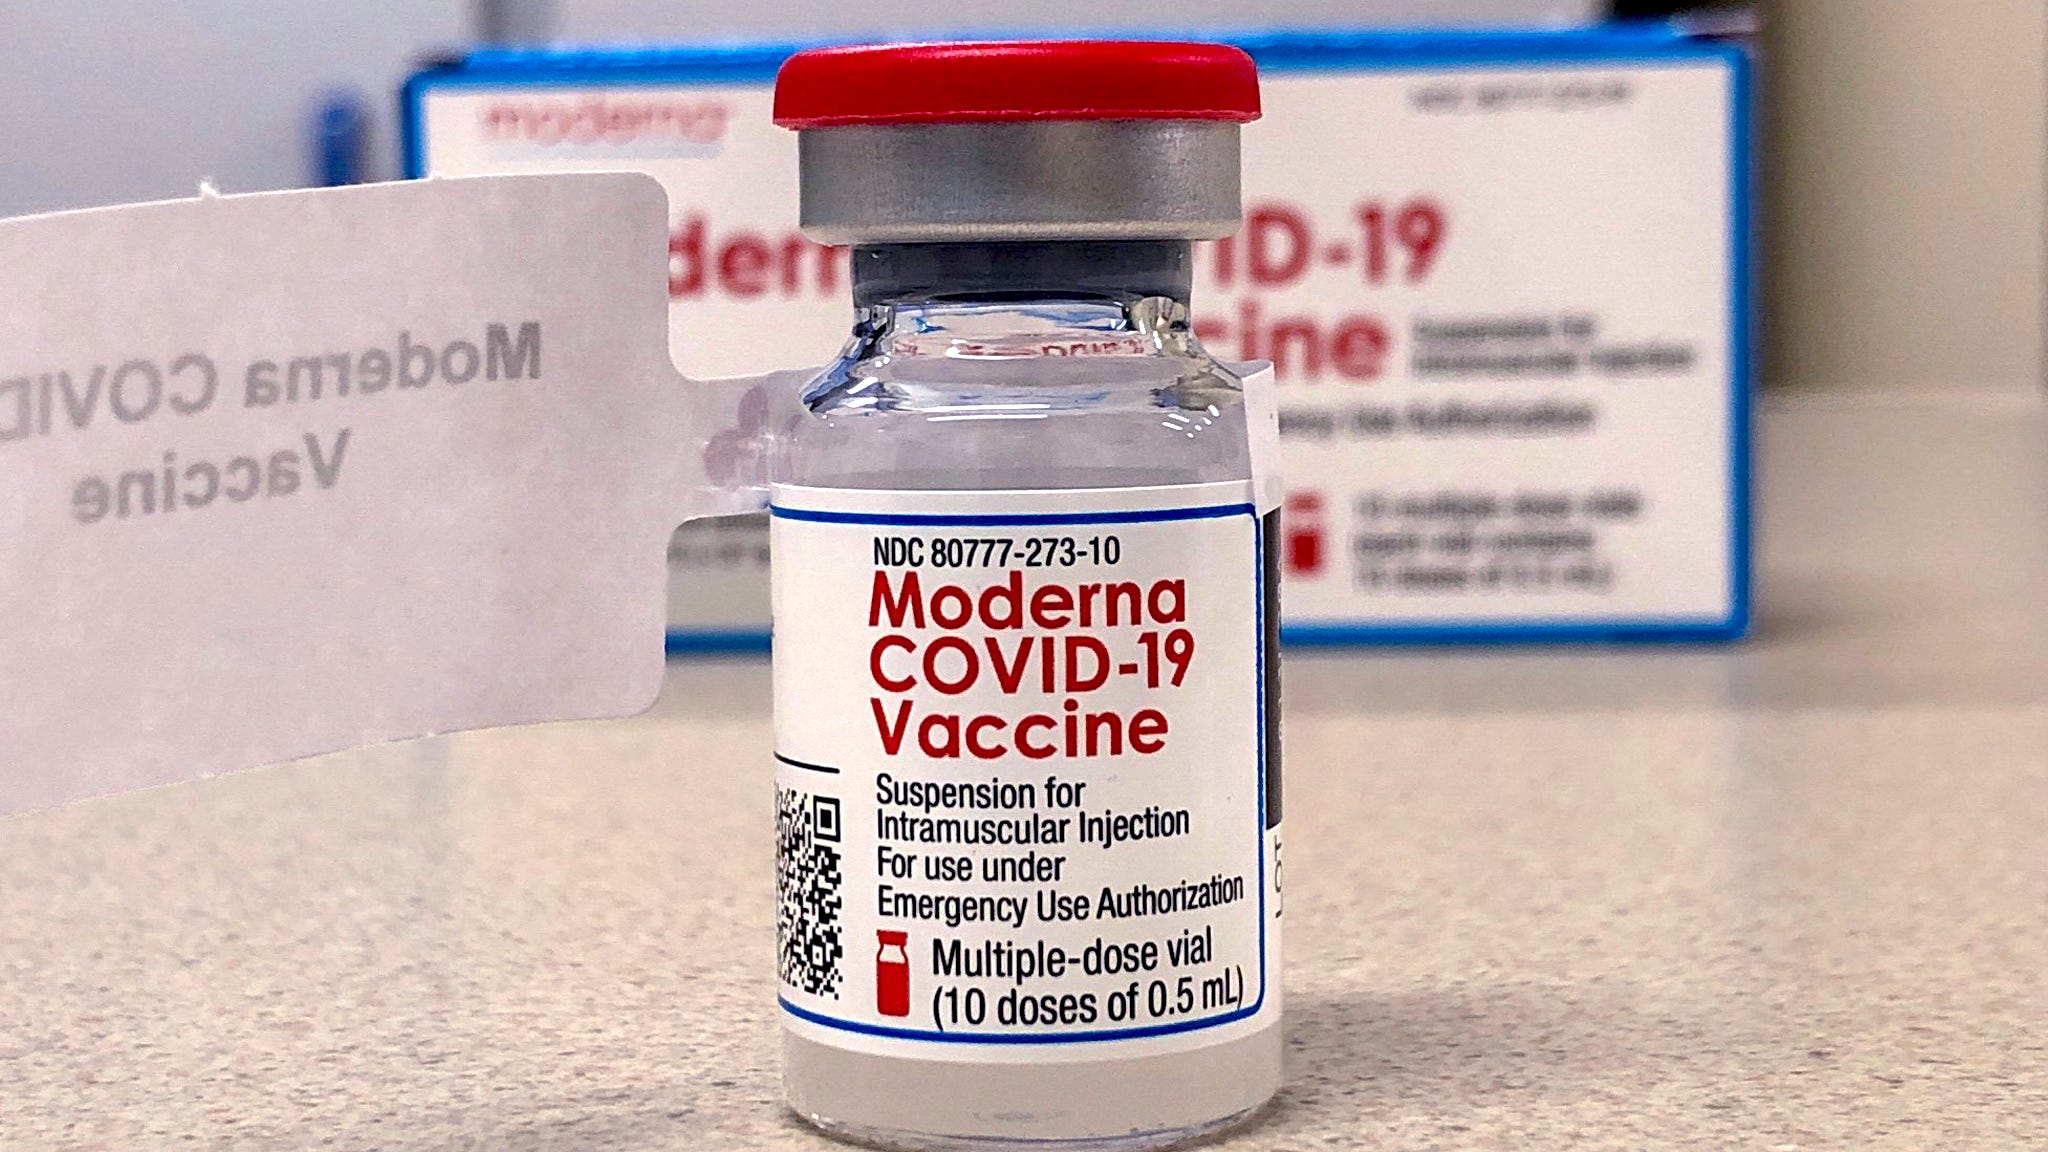 12,000 doses of Moderna's COVID-19 vaccines spoiled on way to Michigan